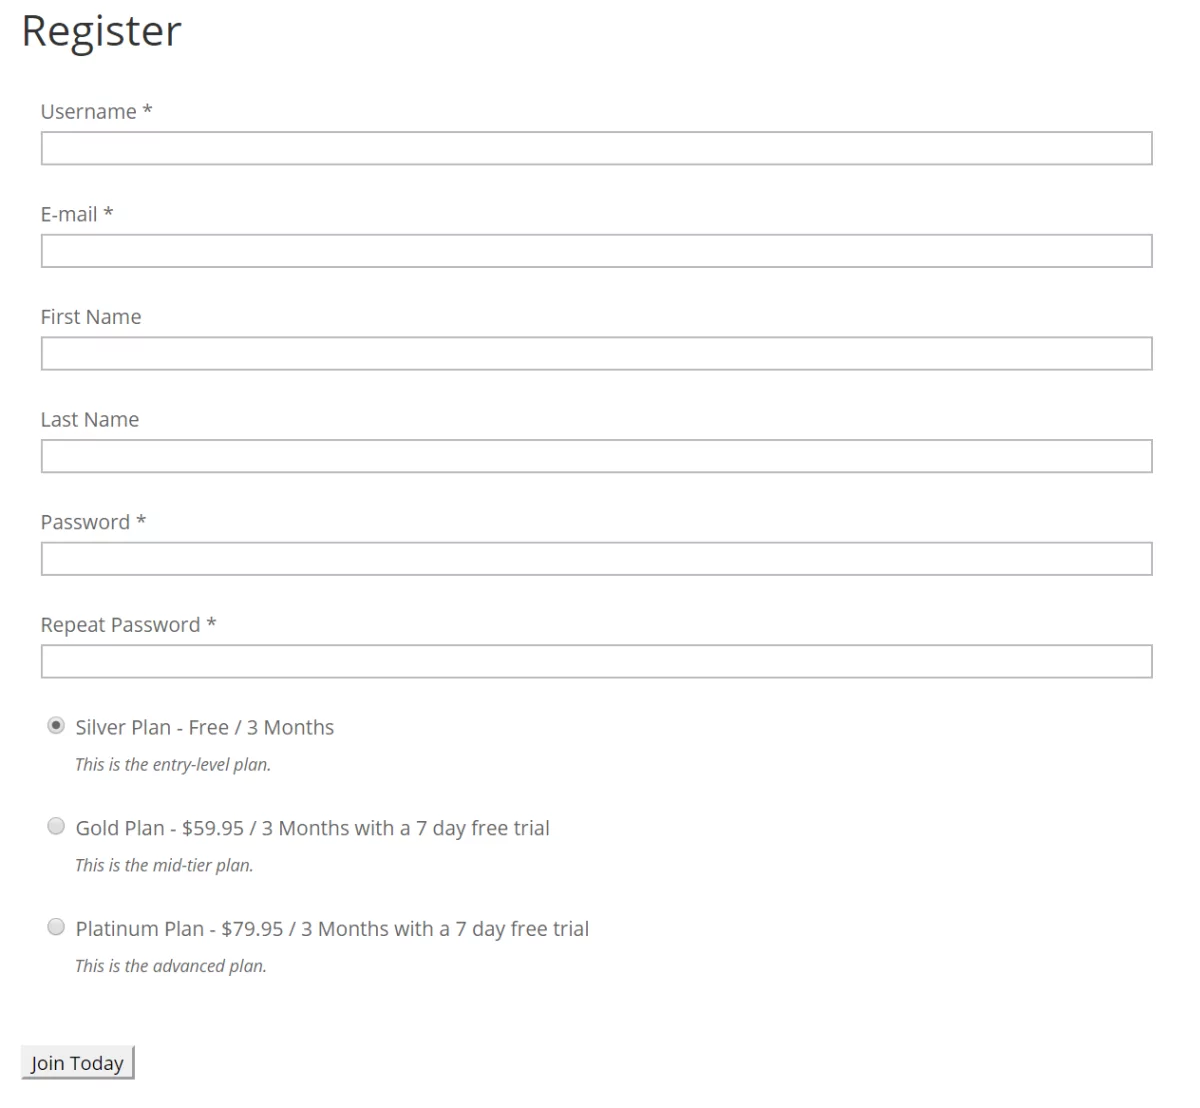 Preview of the registration form